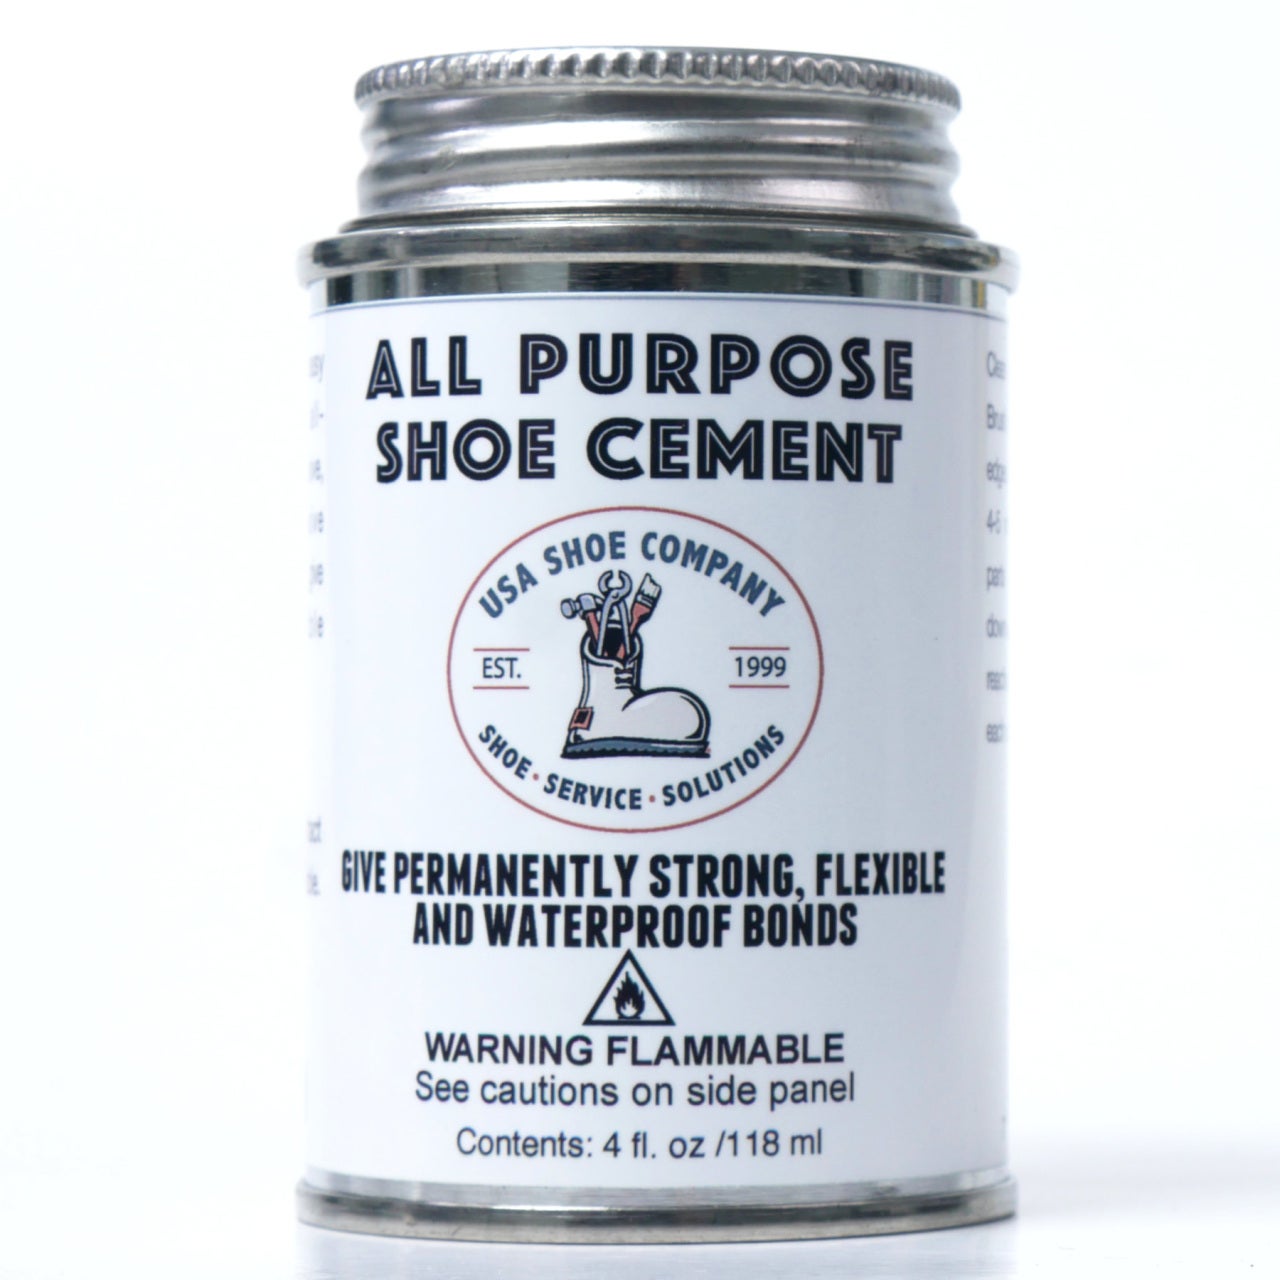 shoe-care-products  Shoe Service Solutions: Repair, Refinish, Renew - The  USA Shoe Company